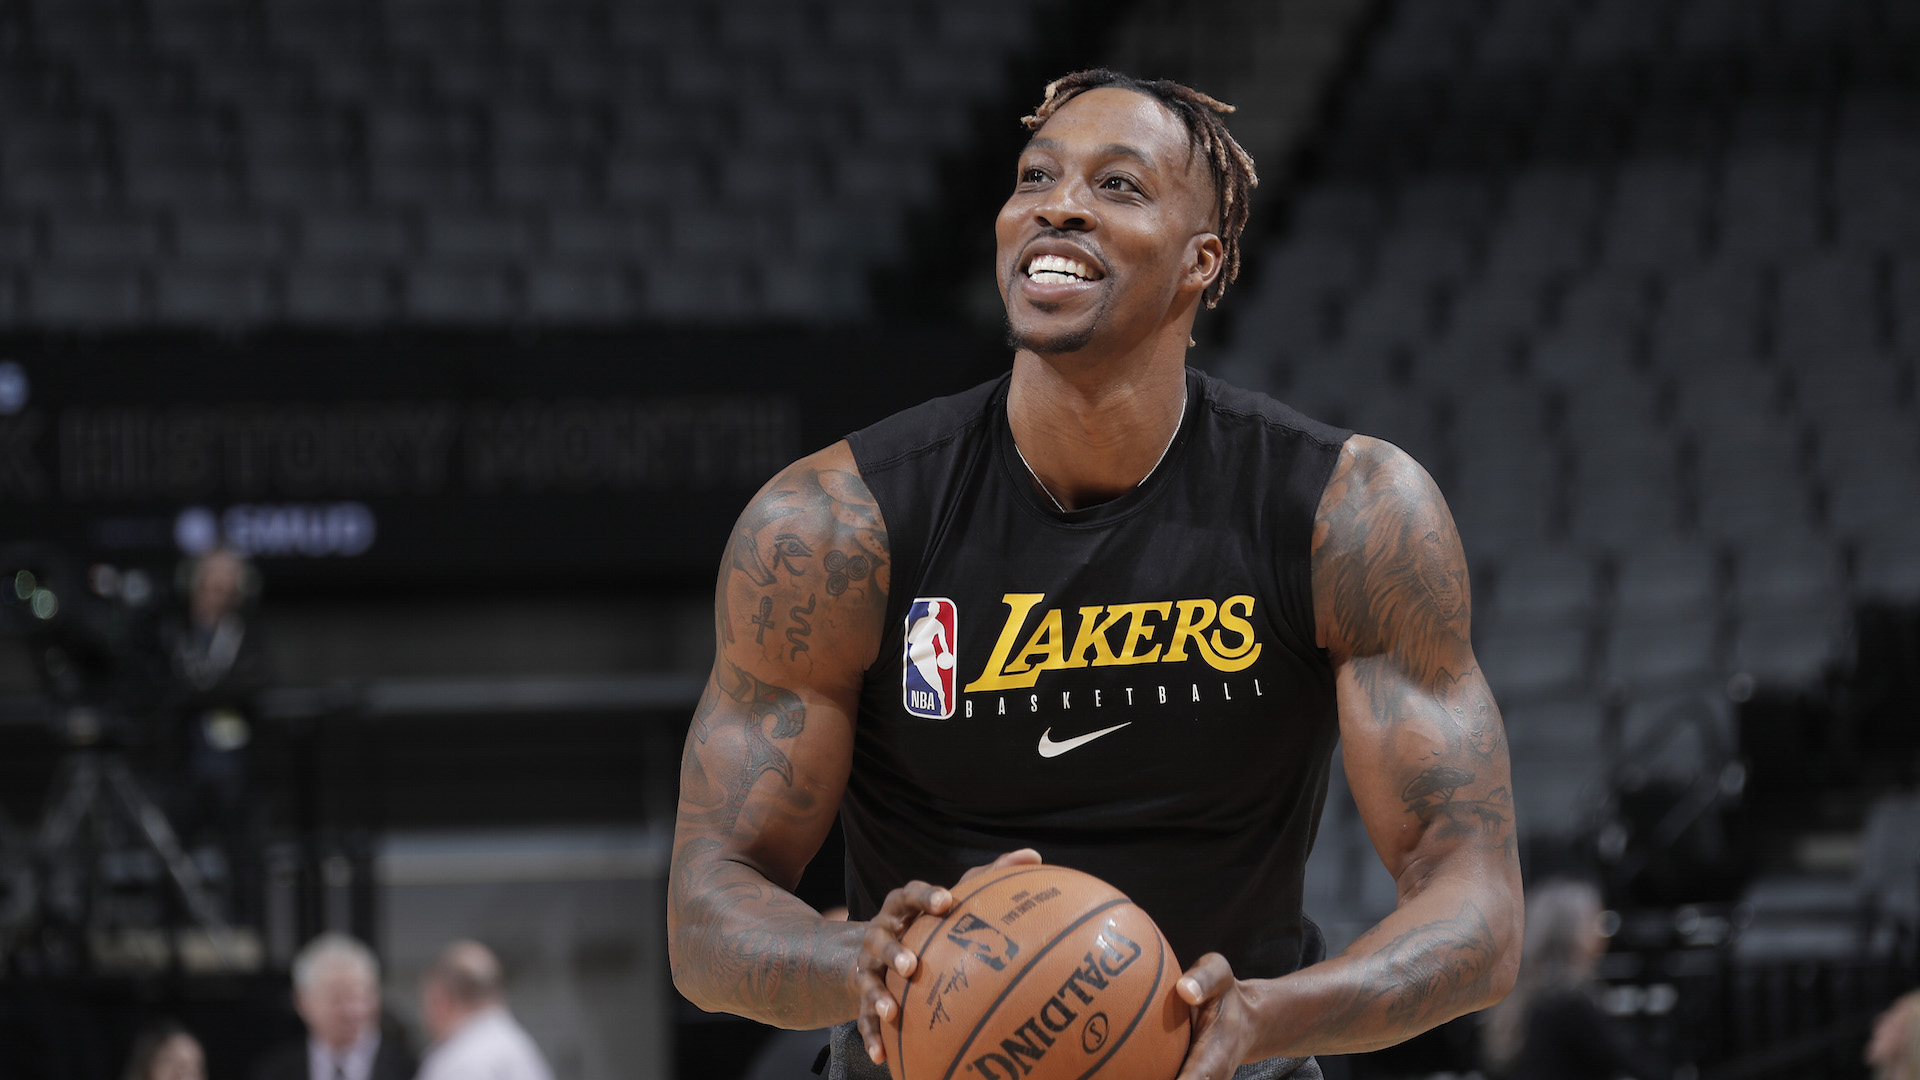 Dwight Howard Surprises Fan With IG Live Chat Discussing Life